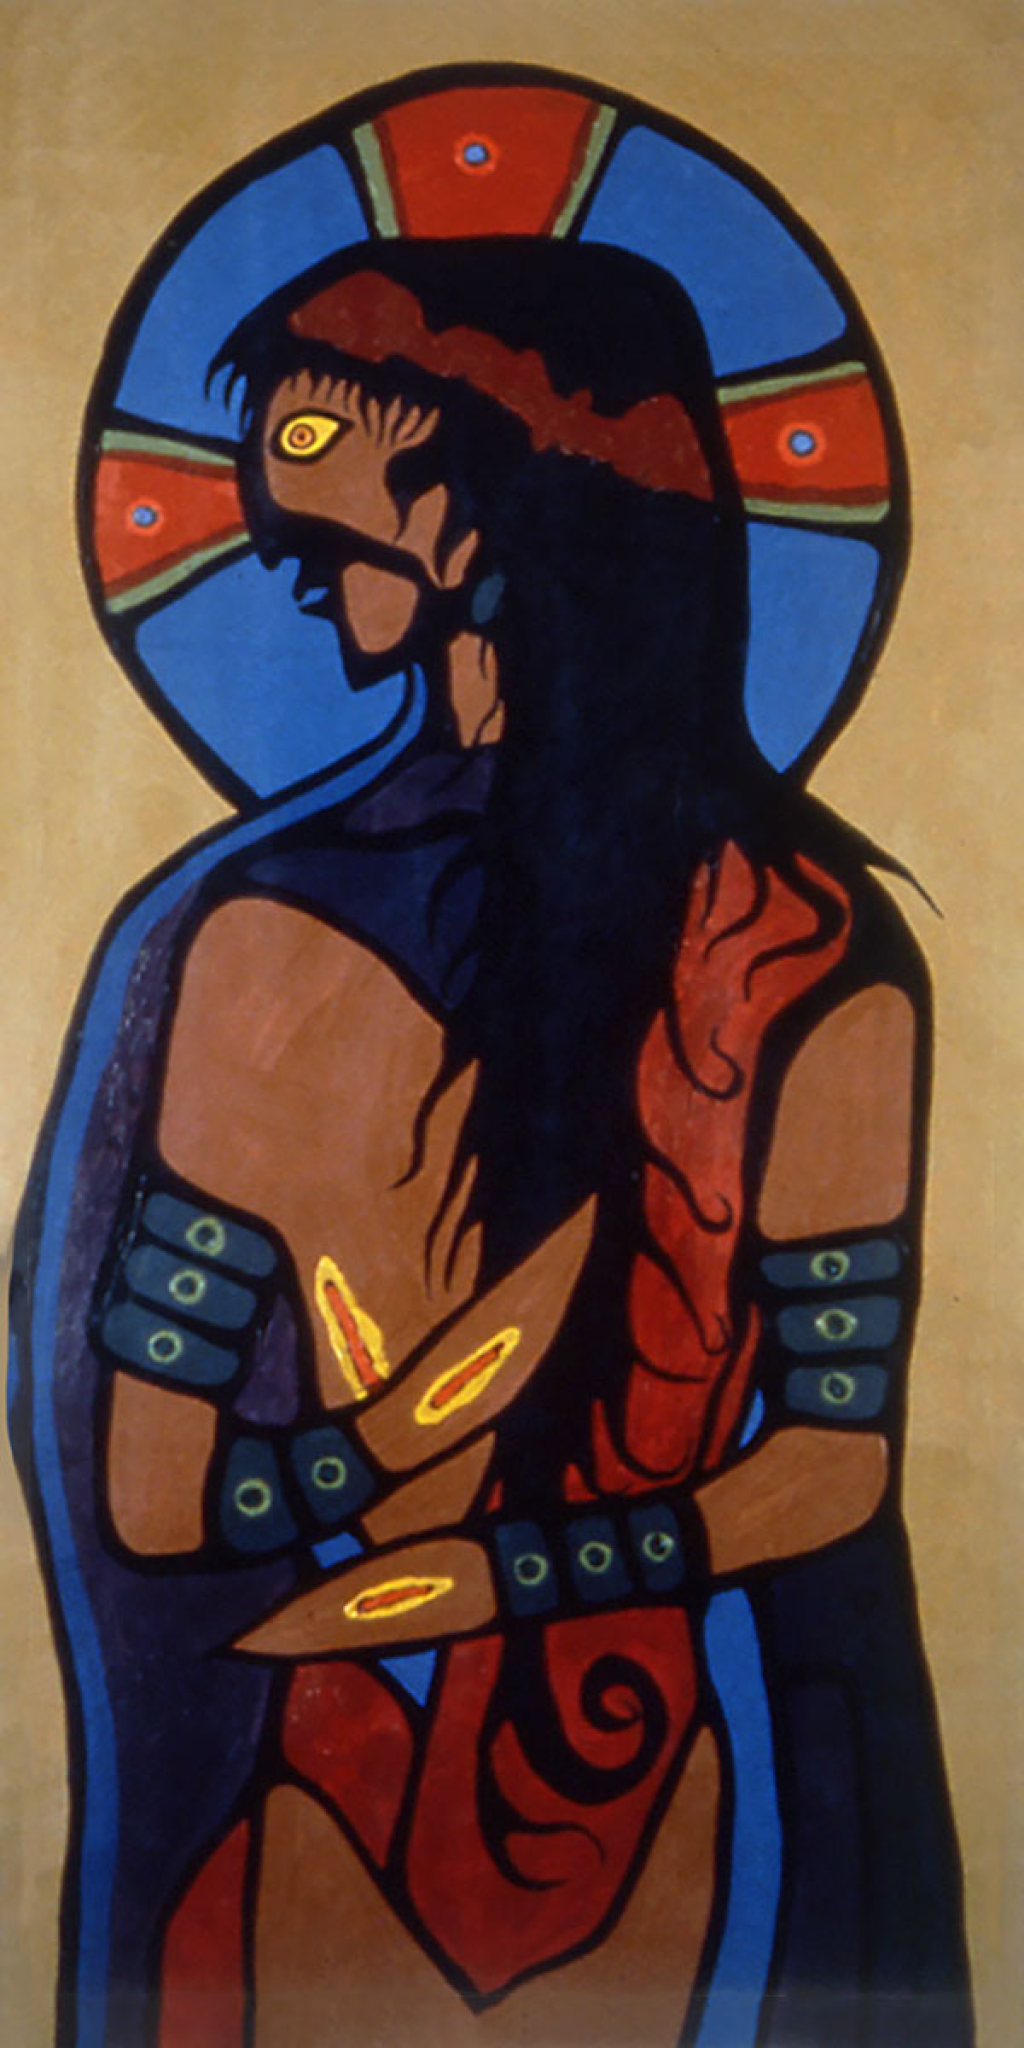 A painting of an indigenous Jesus Christ